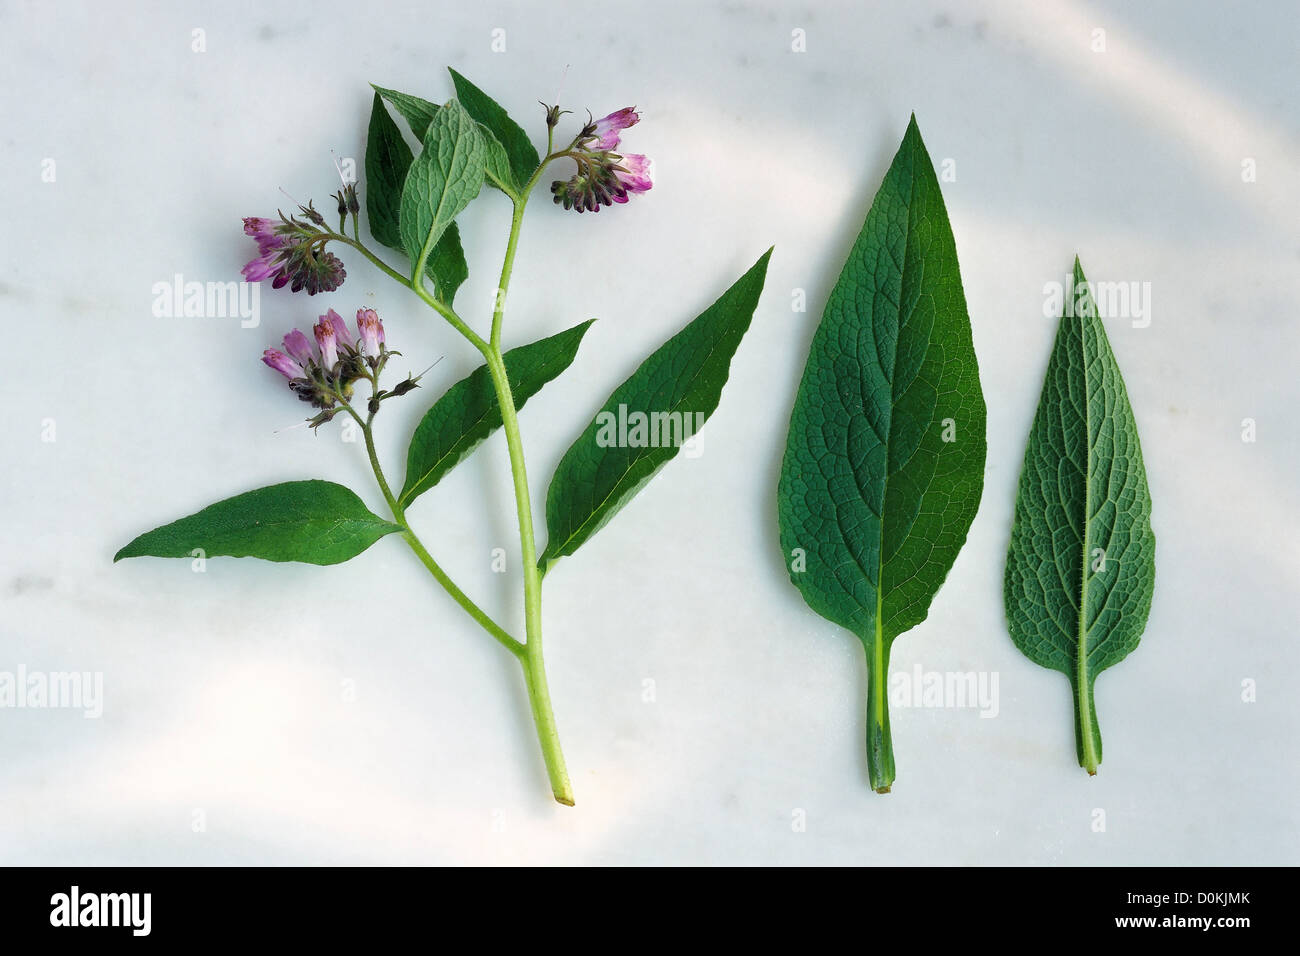 Leaves and flowers of comfrey. Stock Photo